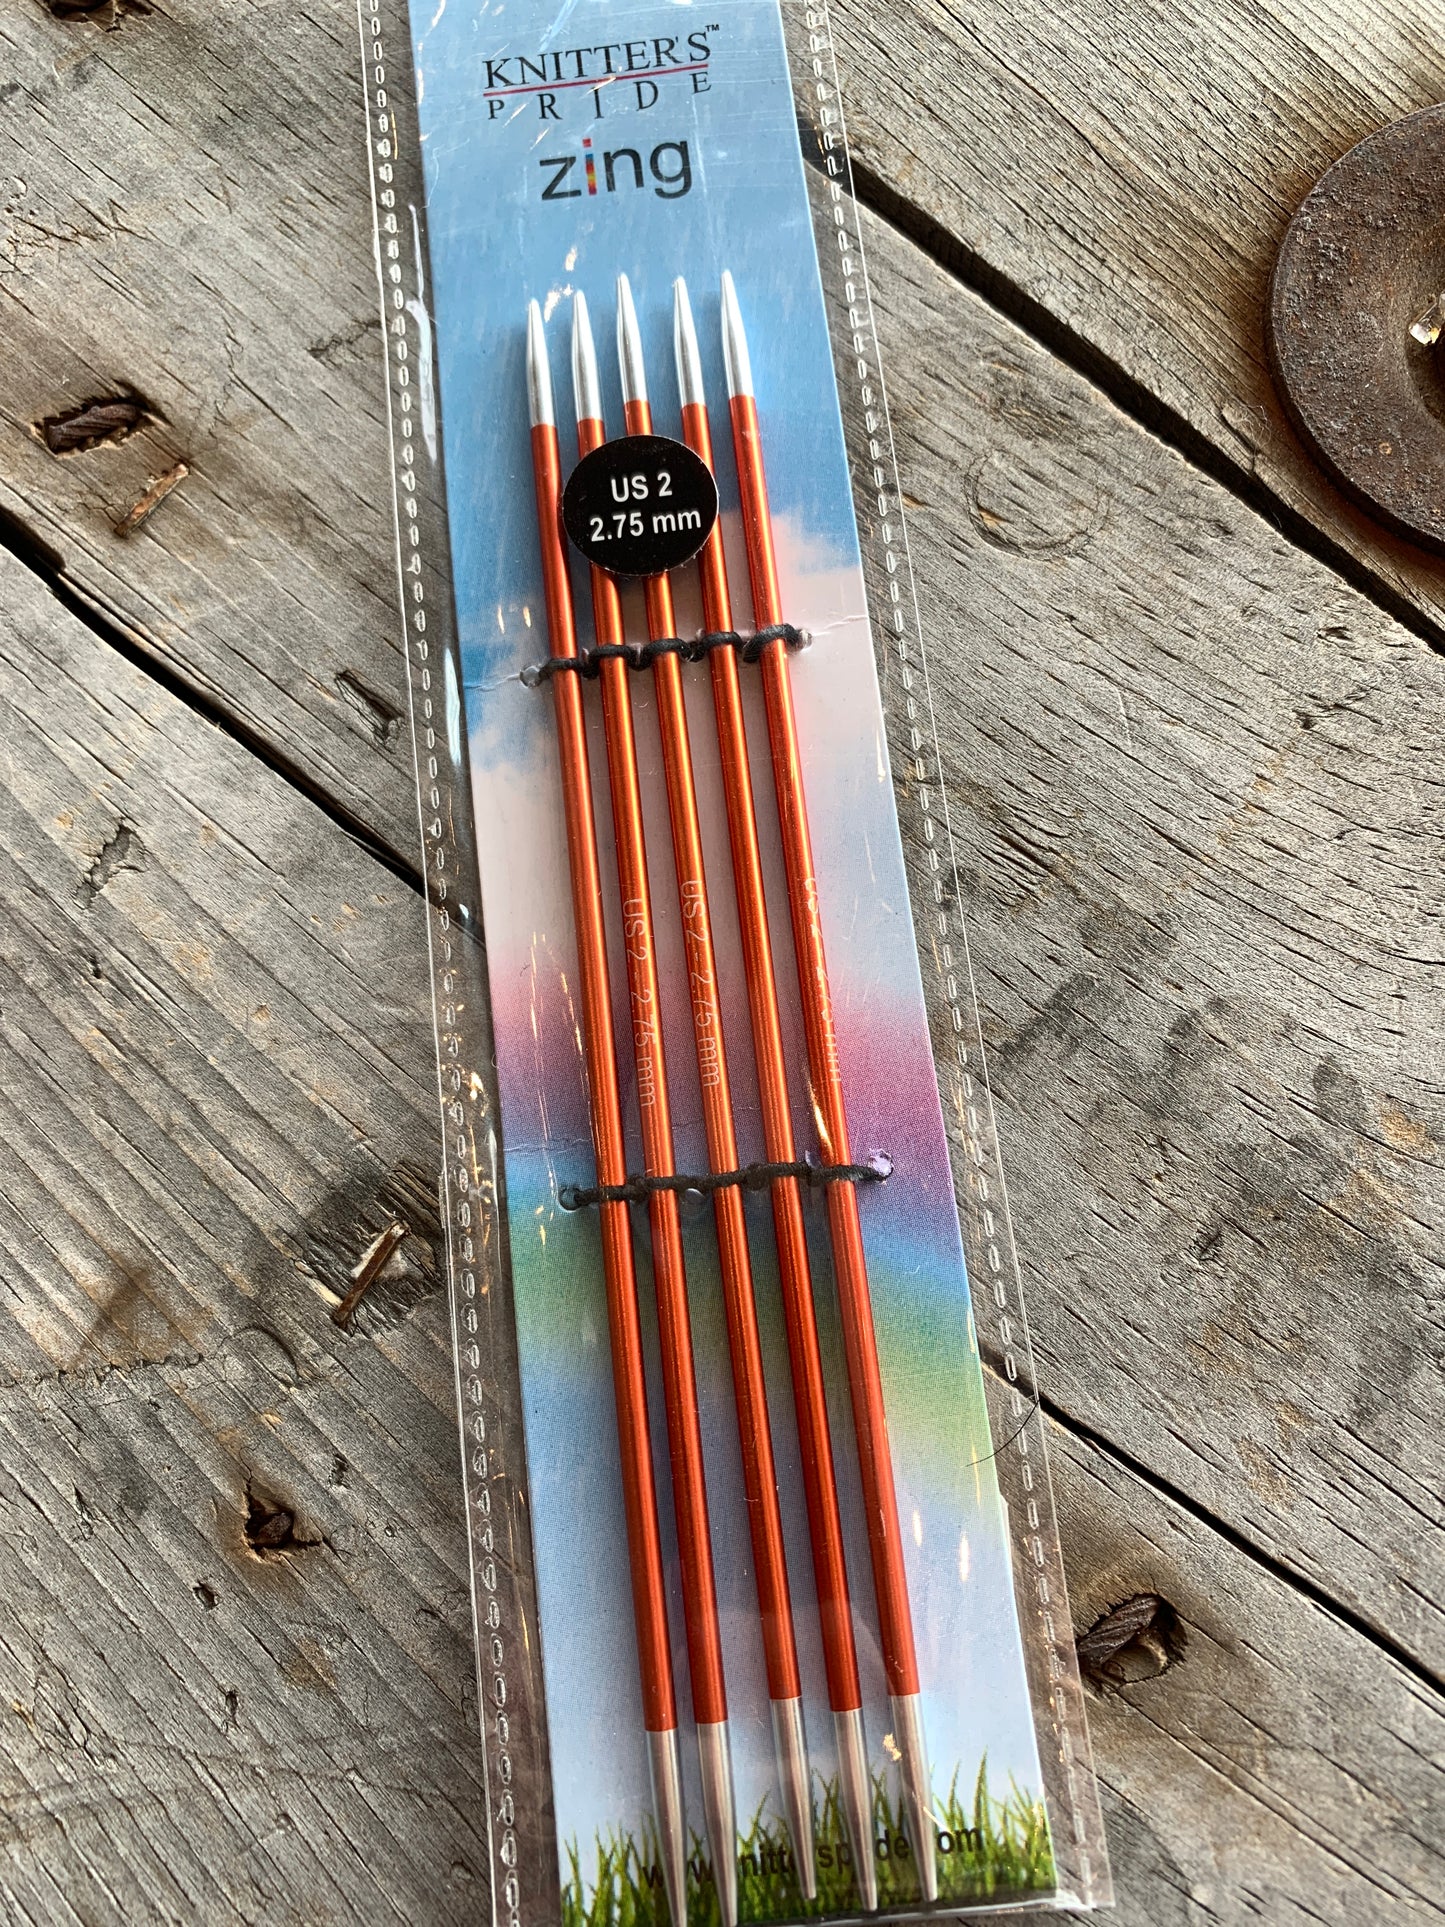 Knitter’Pride - ZING doubles pointes en aluminium /  double pointed needles